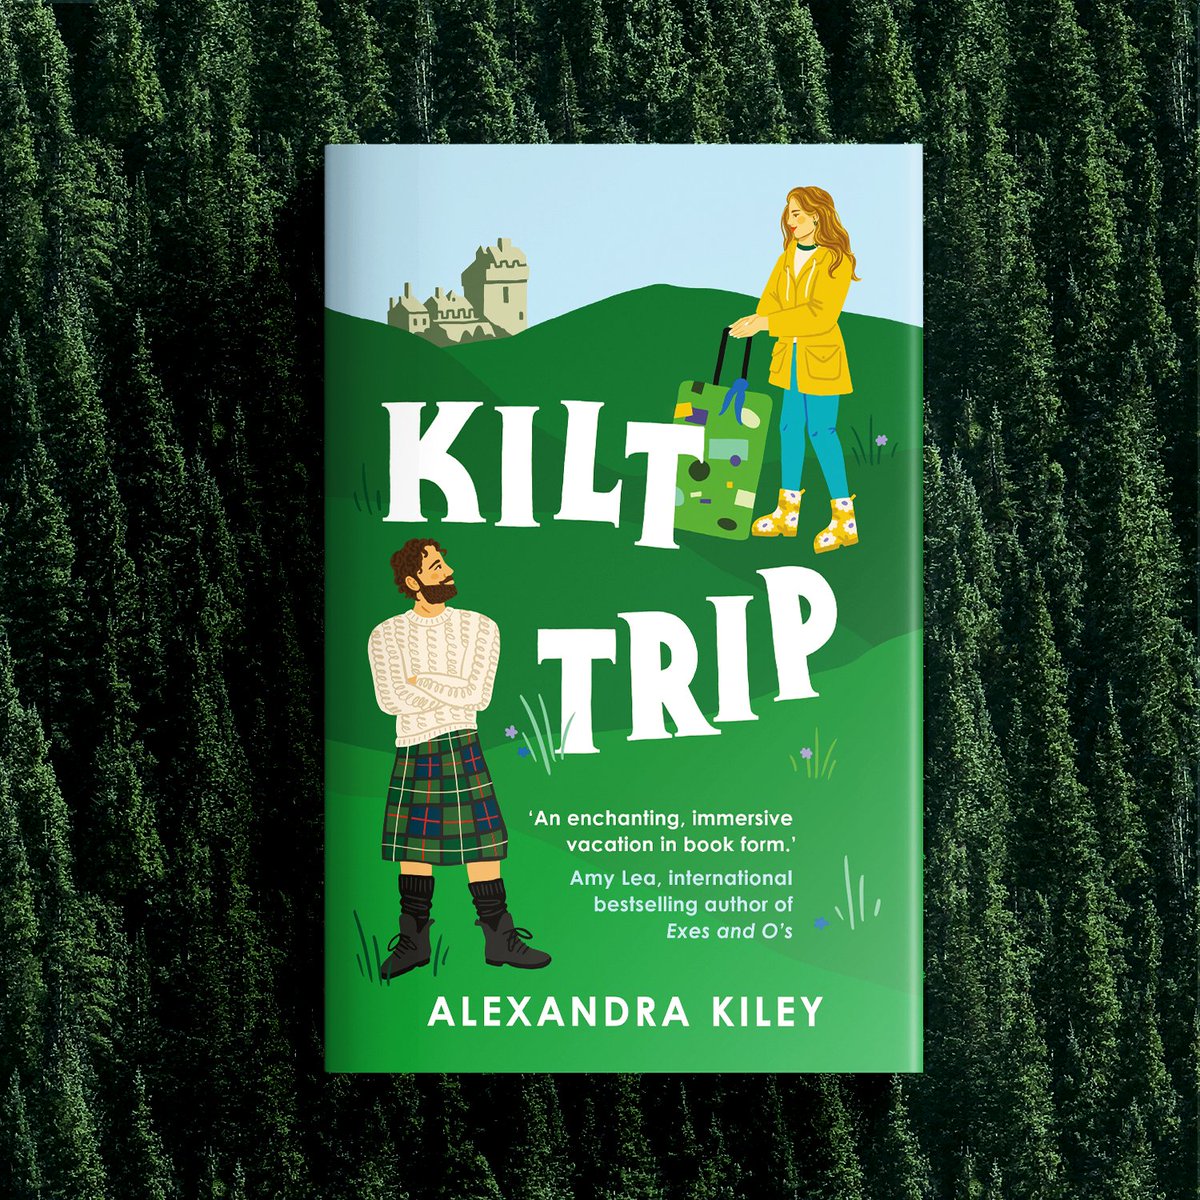 ⭐ ⭐ ⭐ ⭐ ⭐ ‘I absolutely loved every minute.’ – Reader review. #KiltTrip by @AKileyBooks is the gorgeous love story that’s perfect to enjoy in the Spring sunshine ☀️ Get the paperback now: loom.ly/KRt70kE